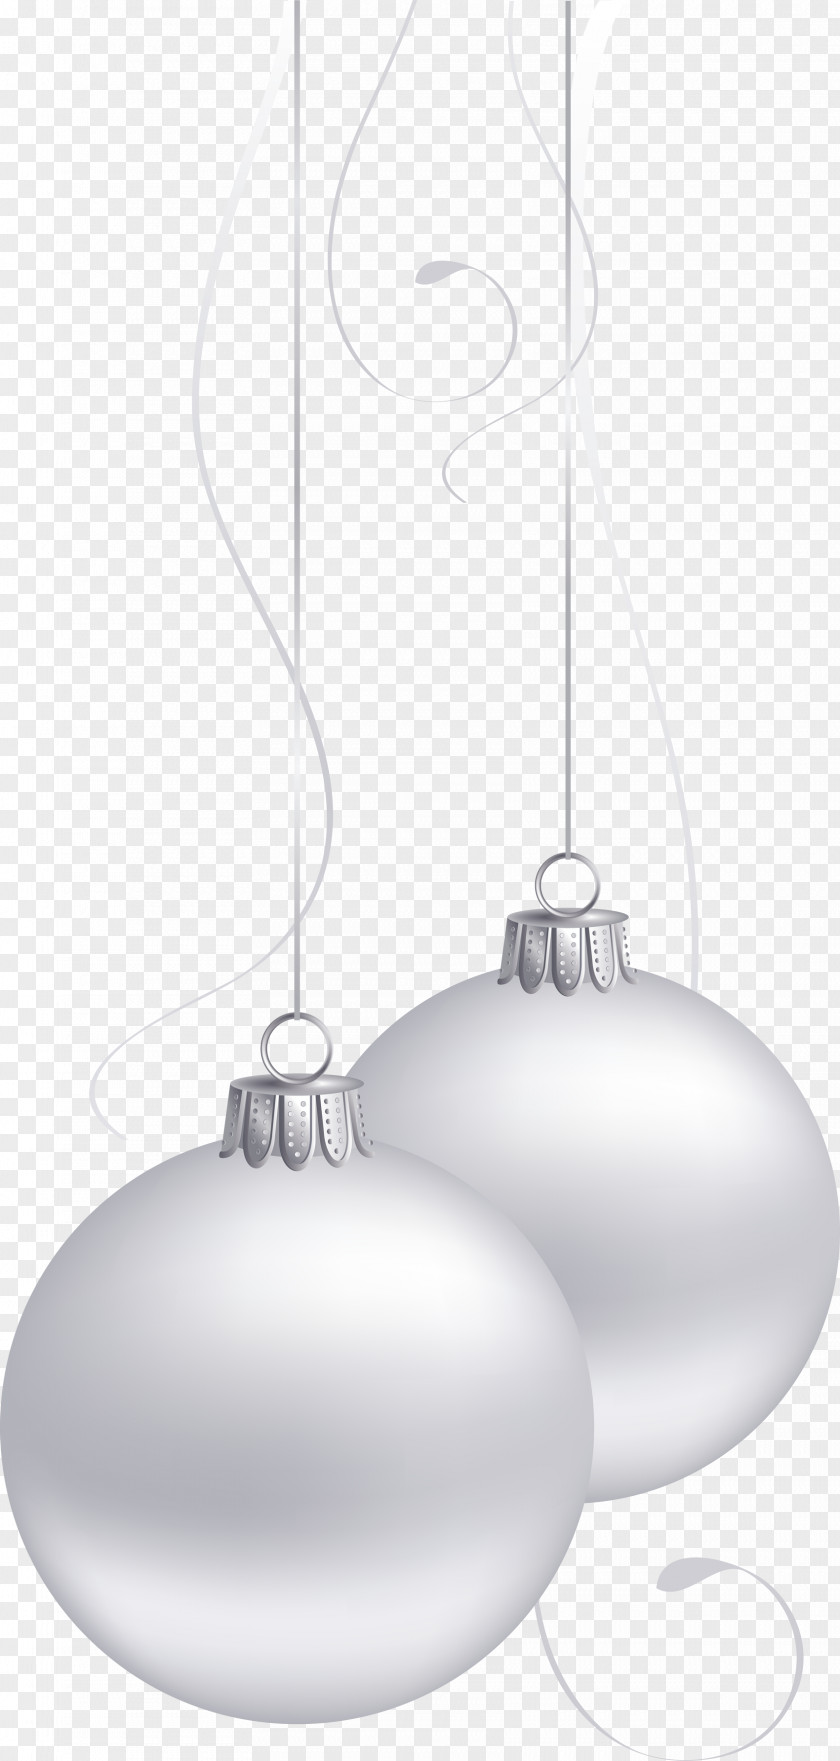 Christmas Image Decoration Ornament New Year PNG